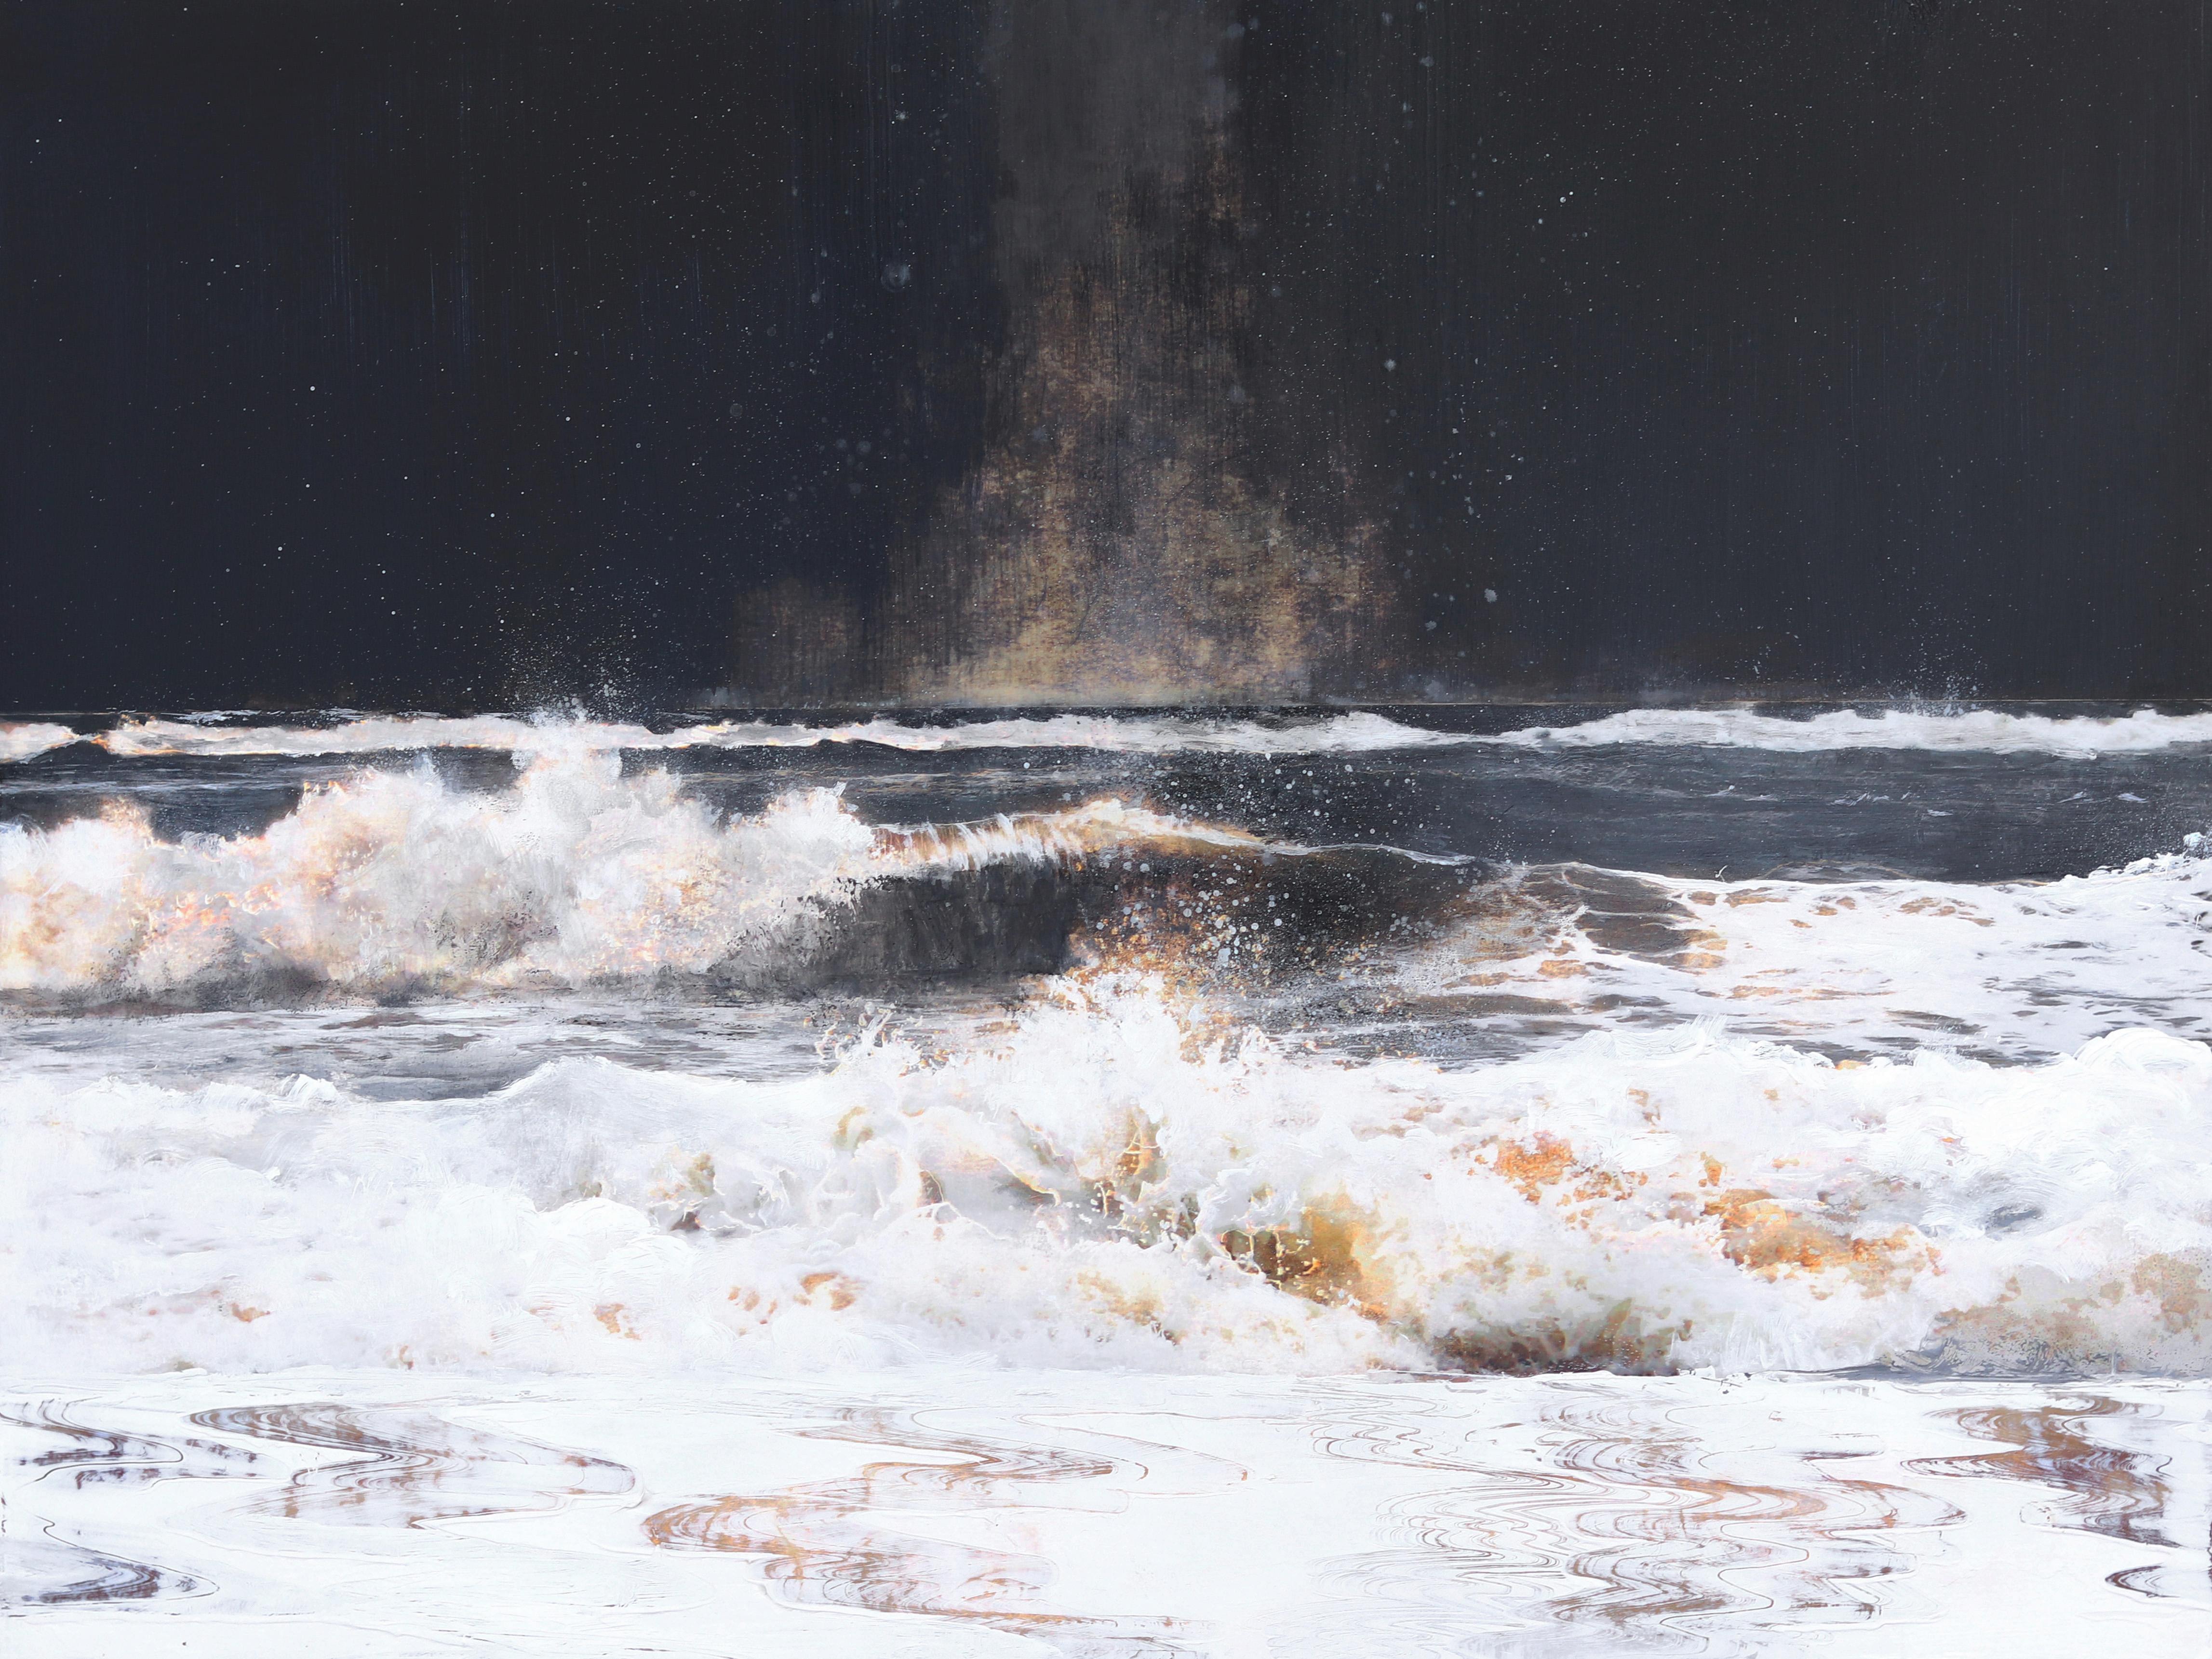 "The Depth of Night" - Seascape painting of crashing waves